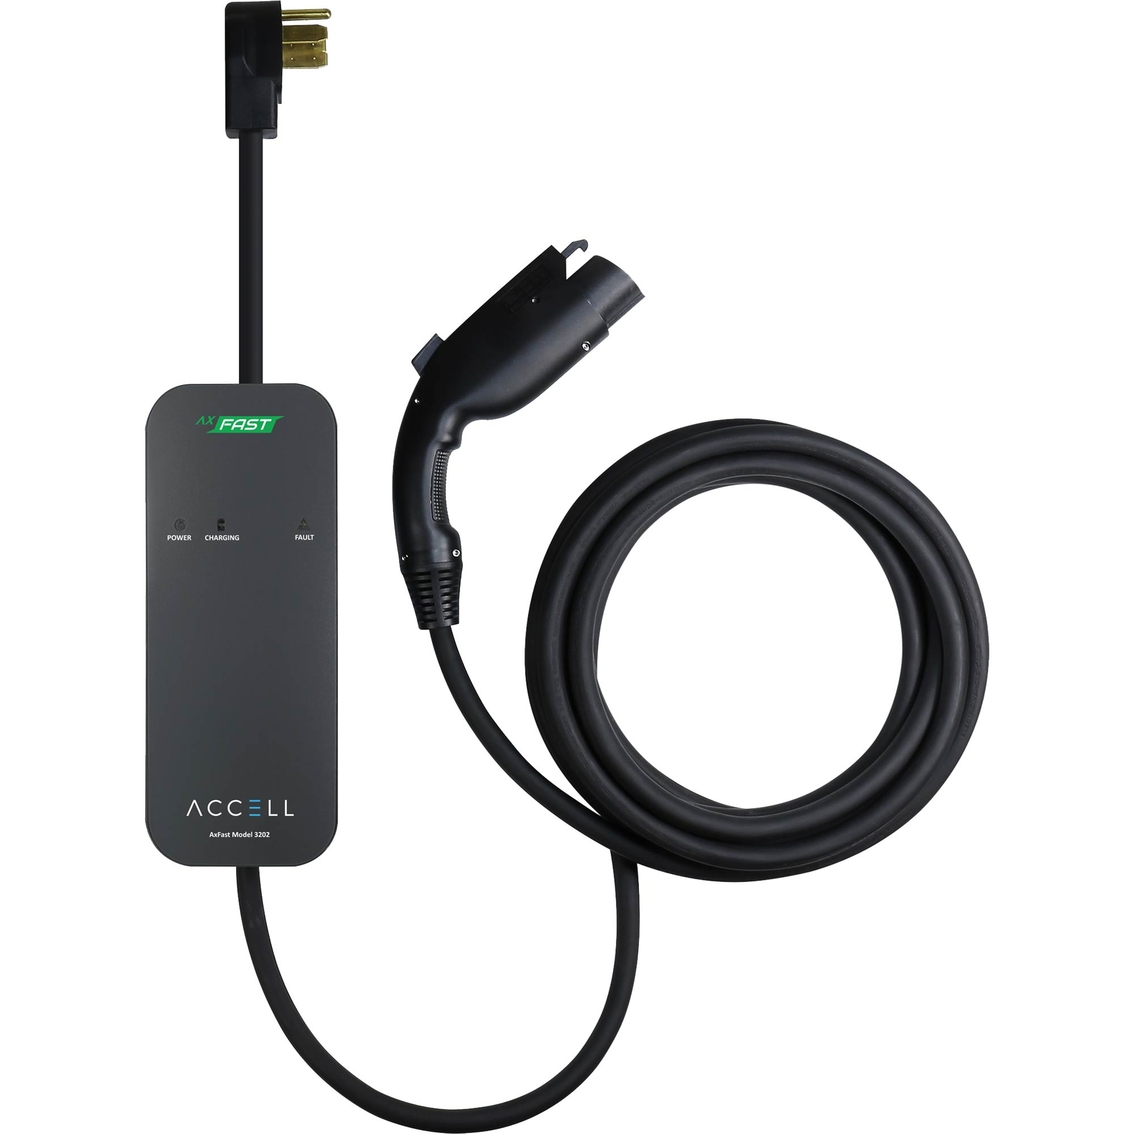 Accell AxFAST 32A Level 2 240V Electric Car Charger, P-240VUSA-3202 - Image 2 of 9